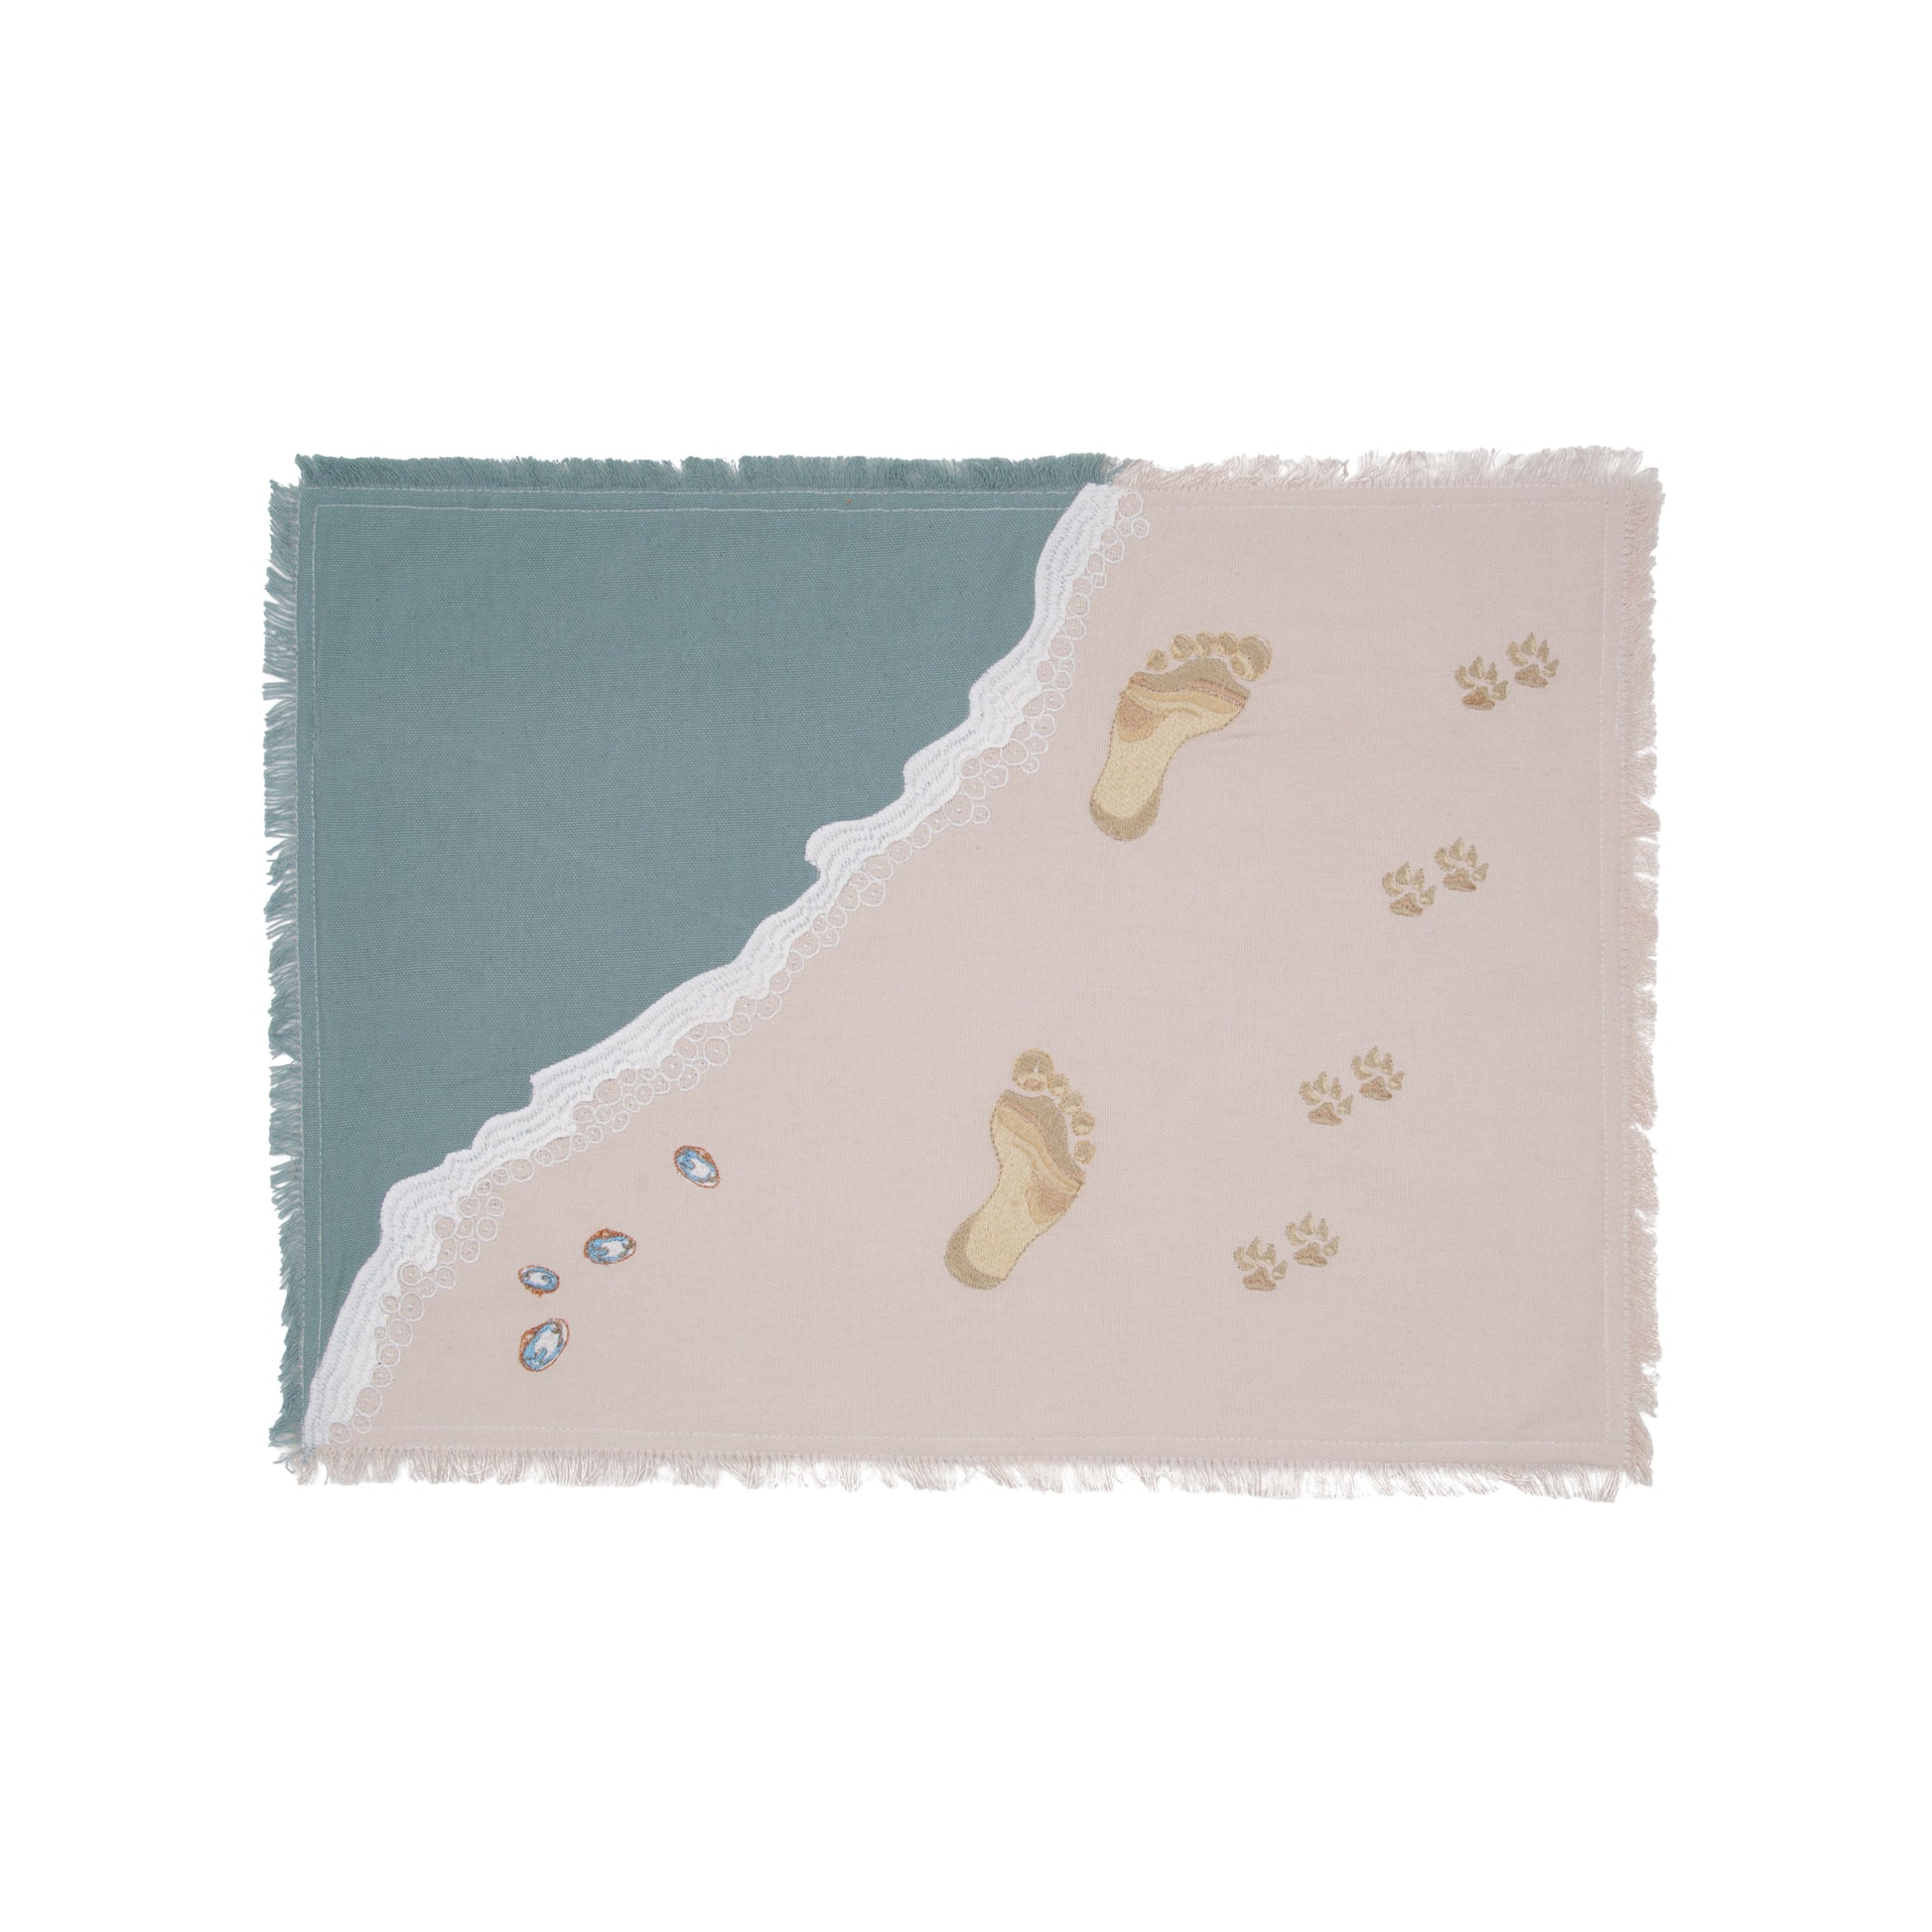 Human and Dog Foot Prints Embroidered Scene Placemat